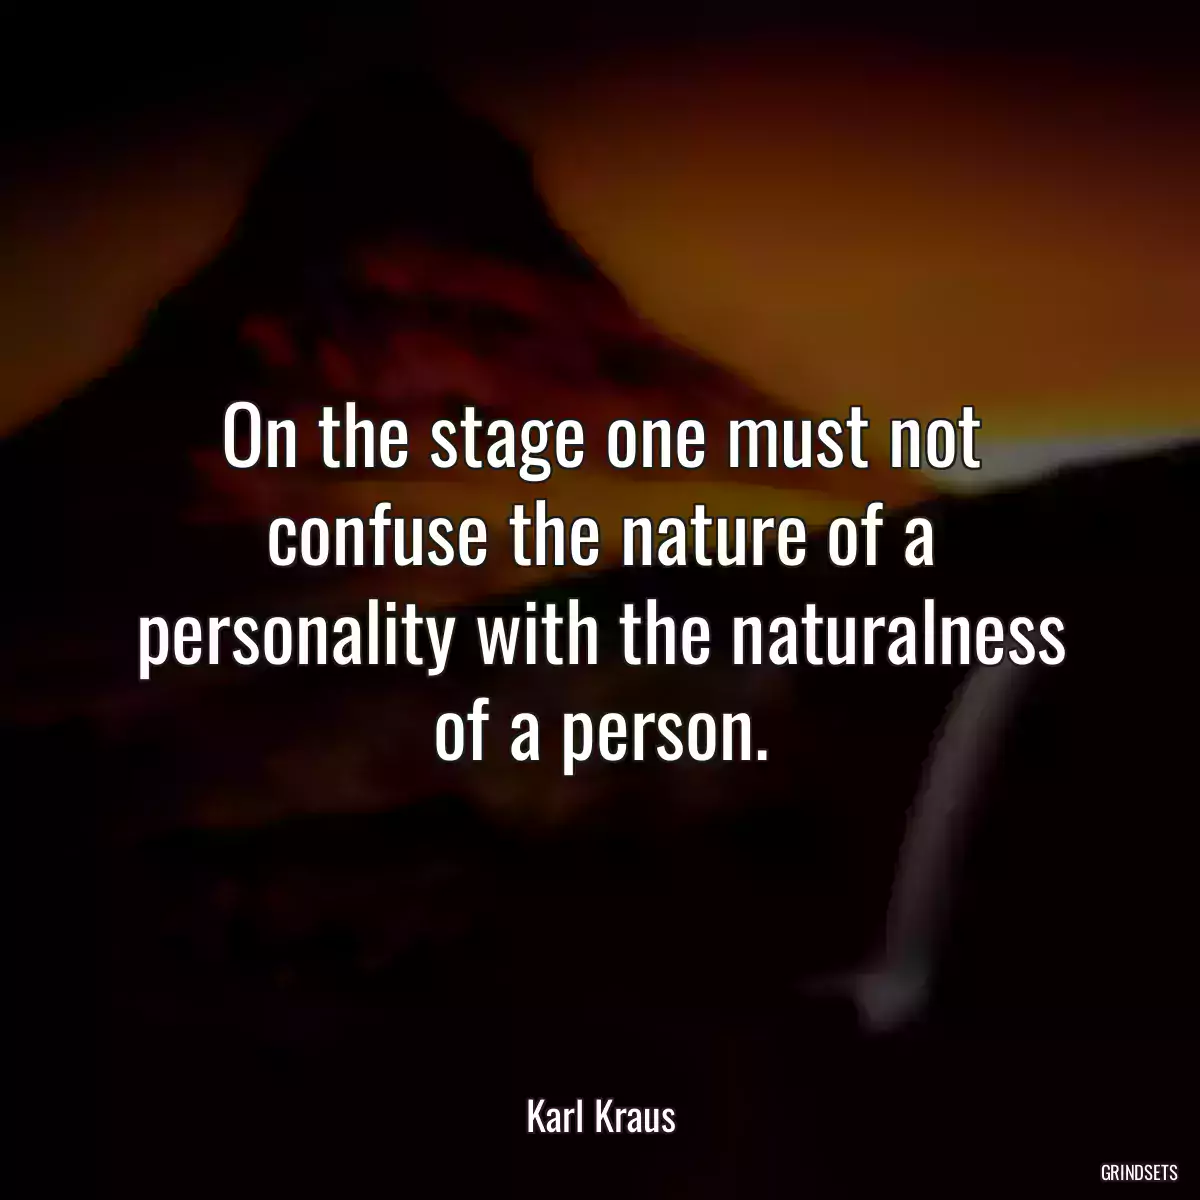 On the stage one must not confuse the nature of a personality with the naturalness of a person.